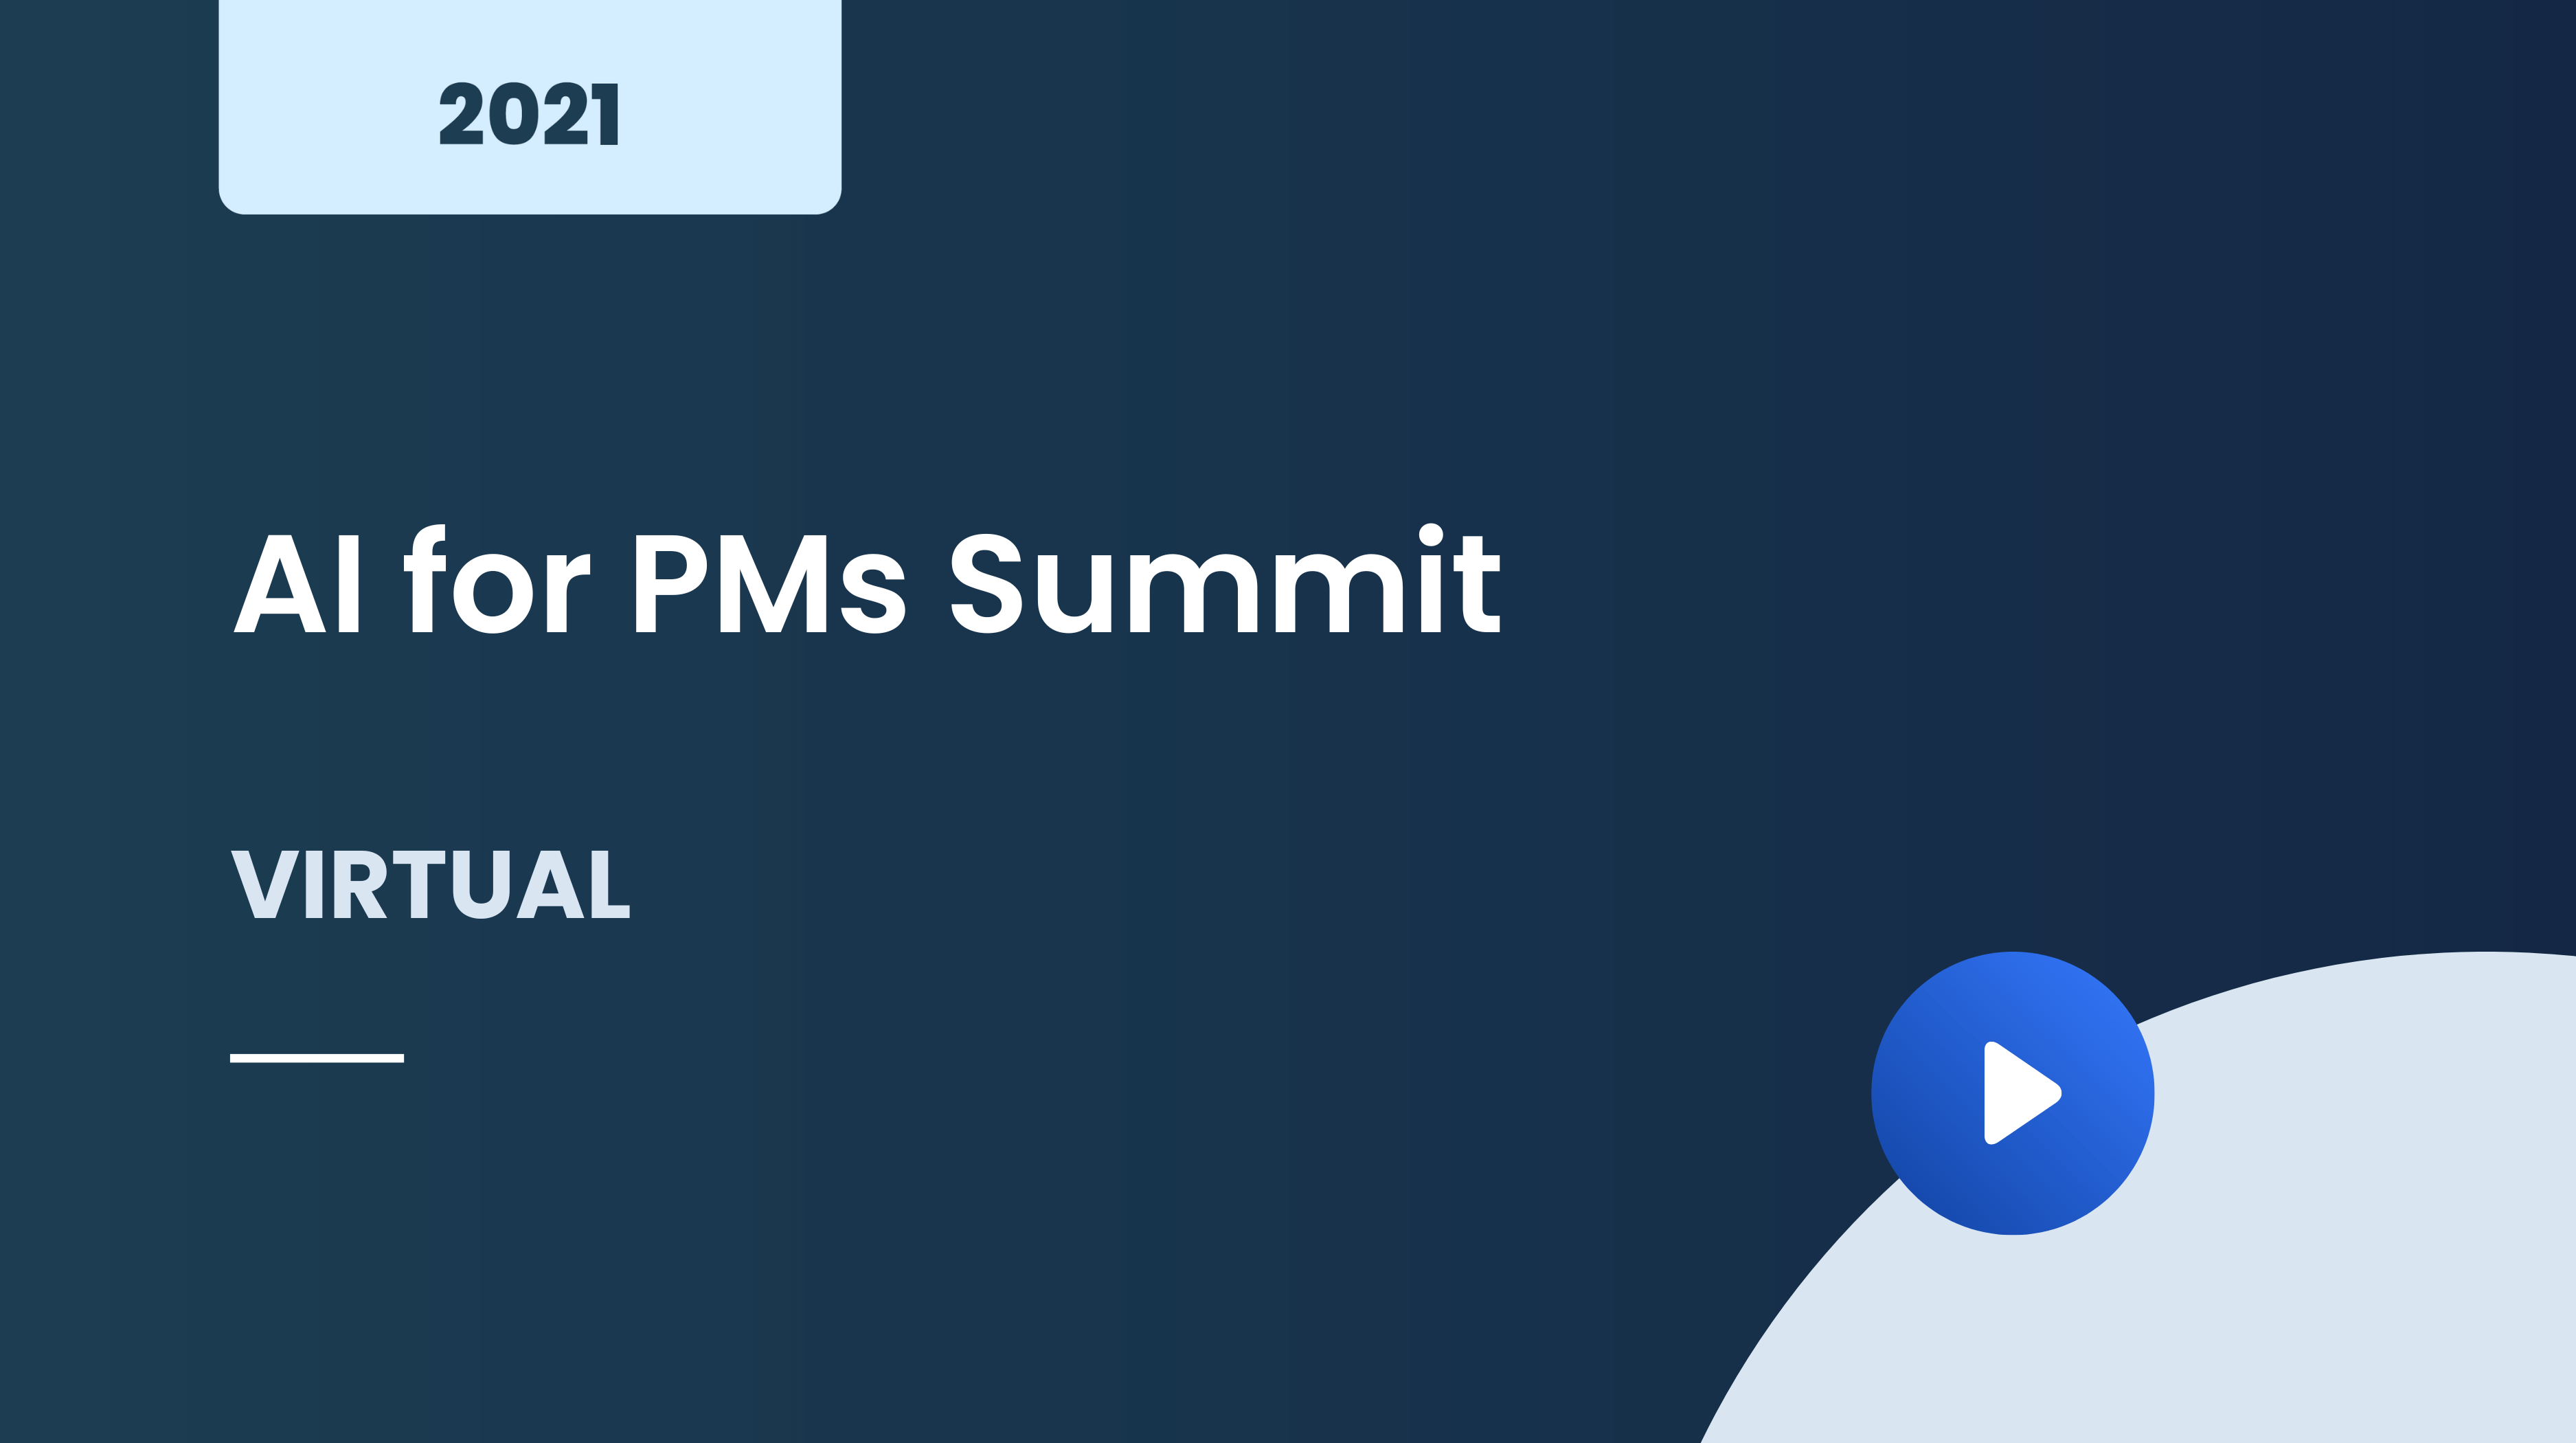 AI for PMs Summit September 2021